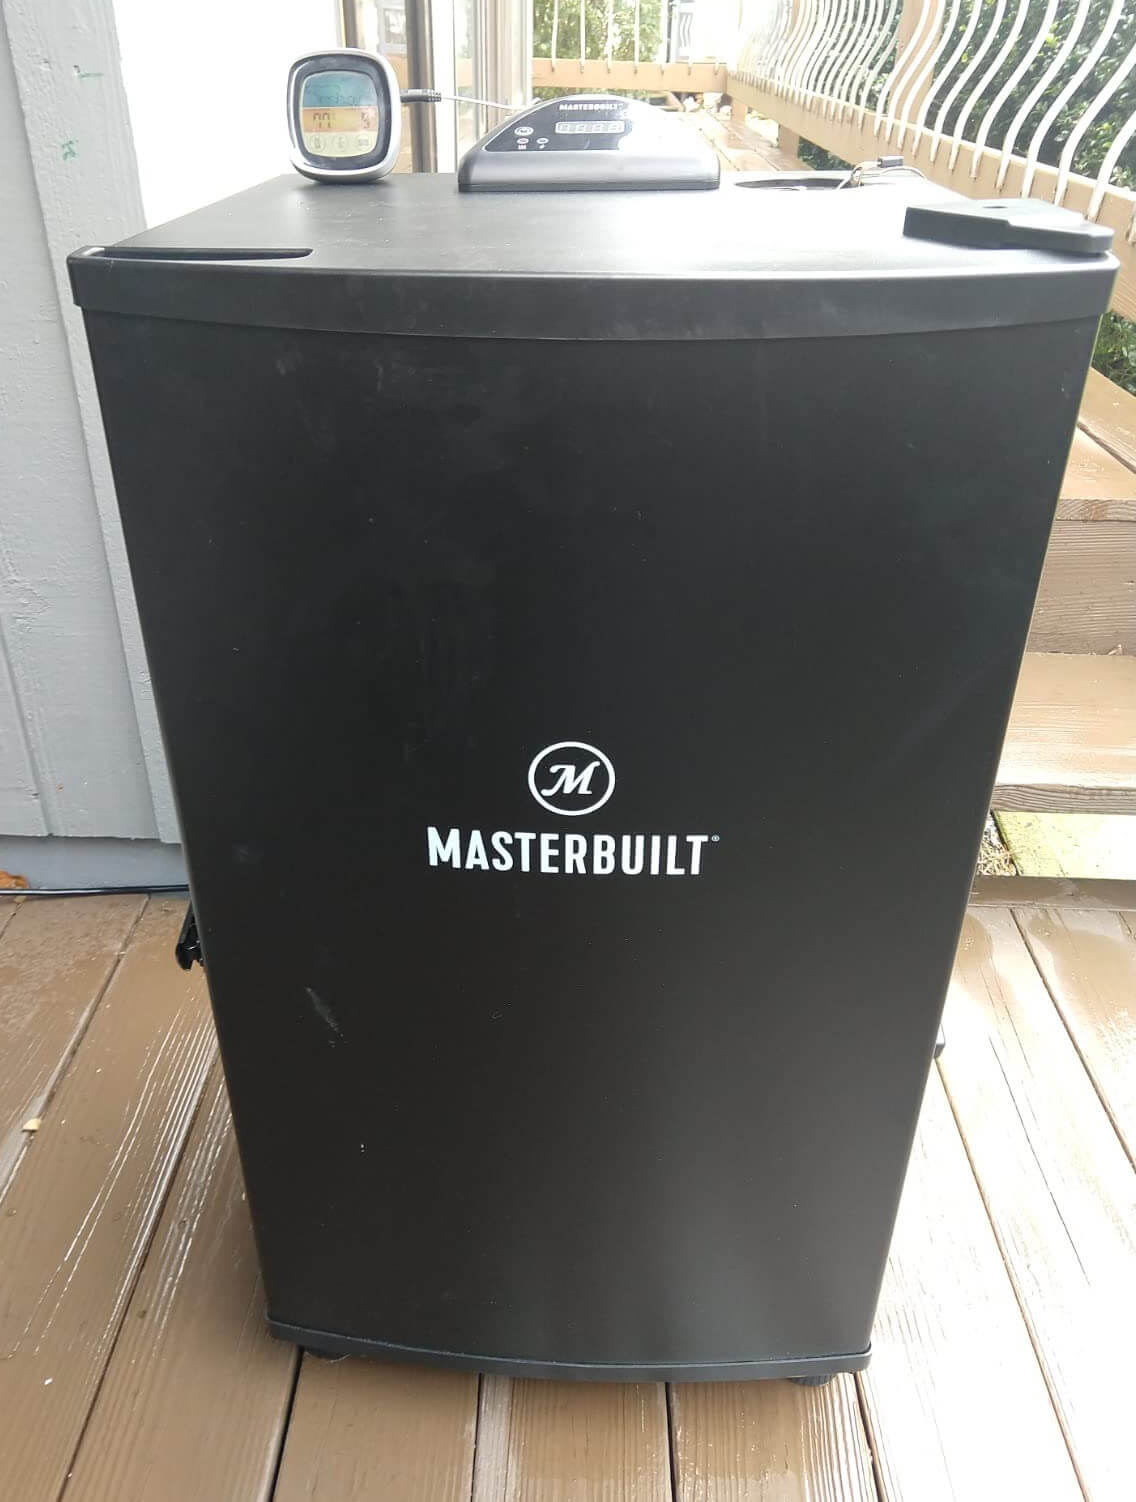 the electric smoker that i use